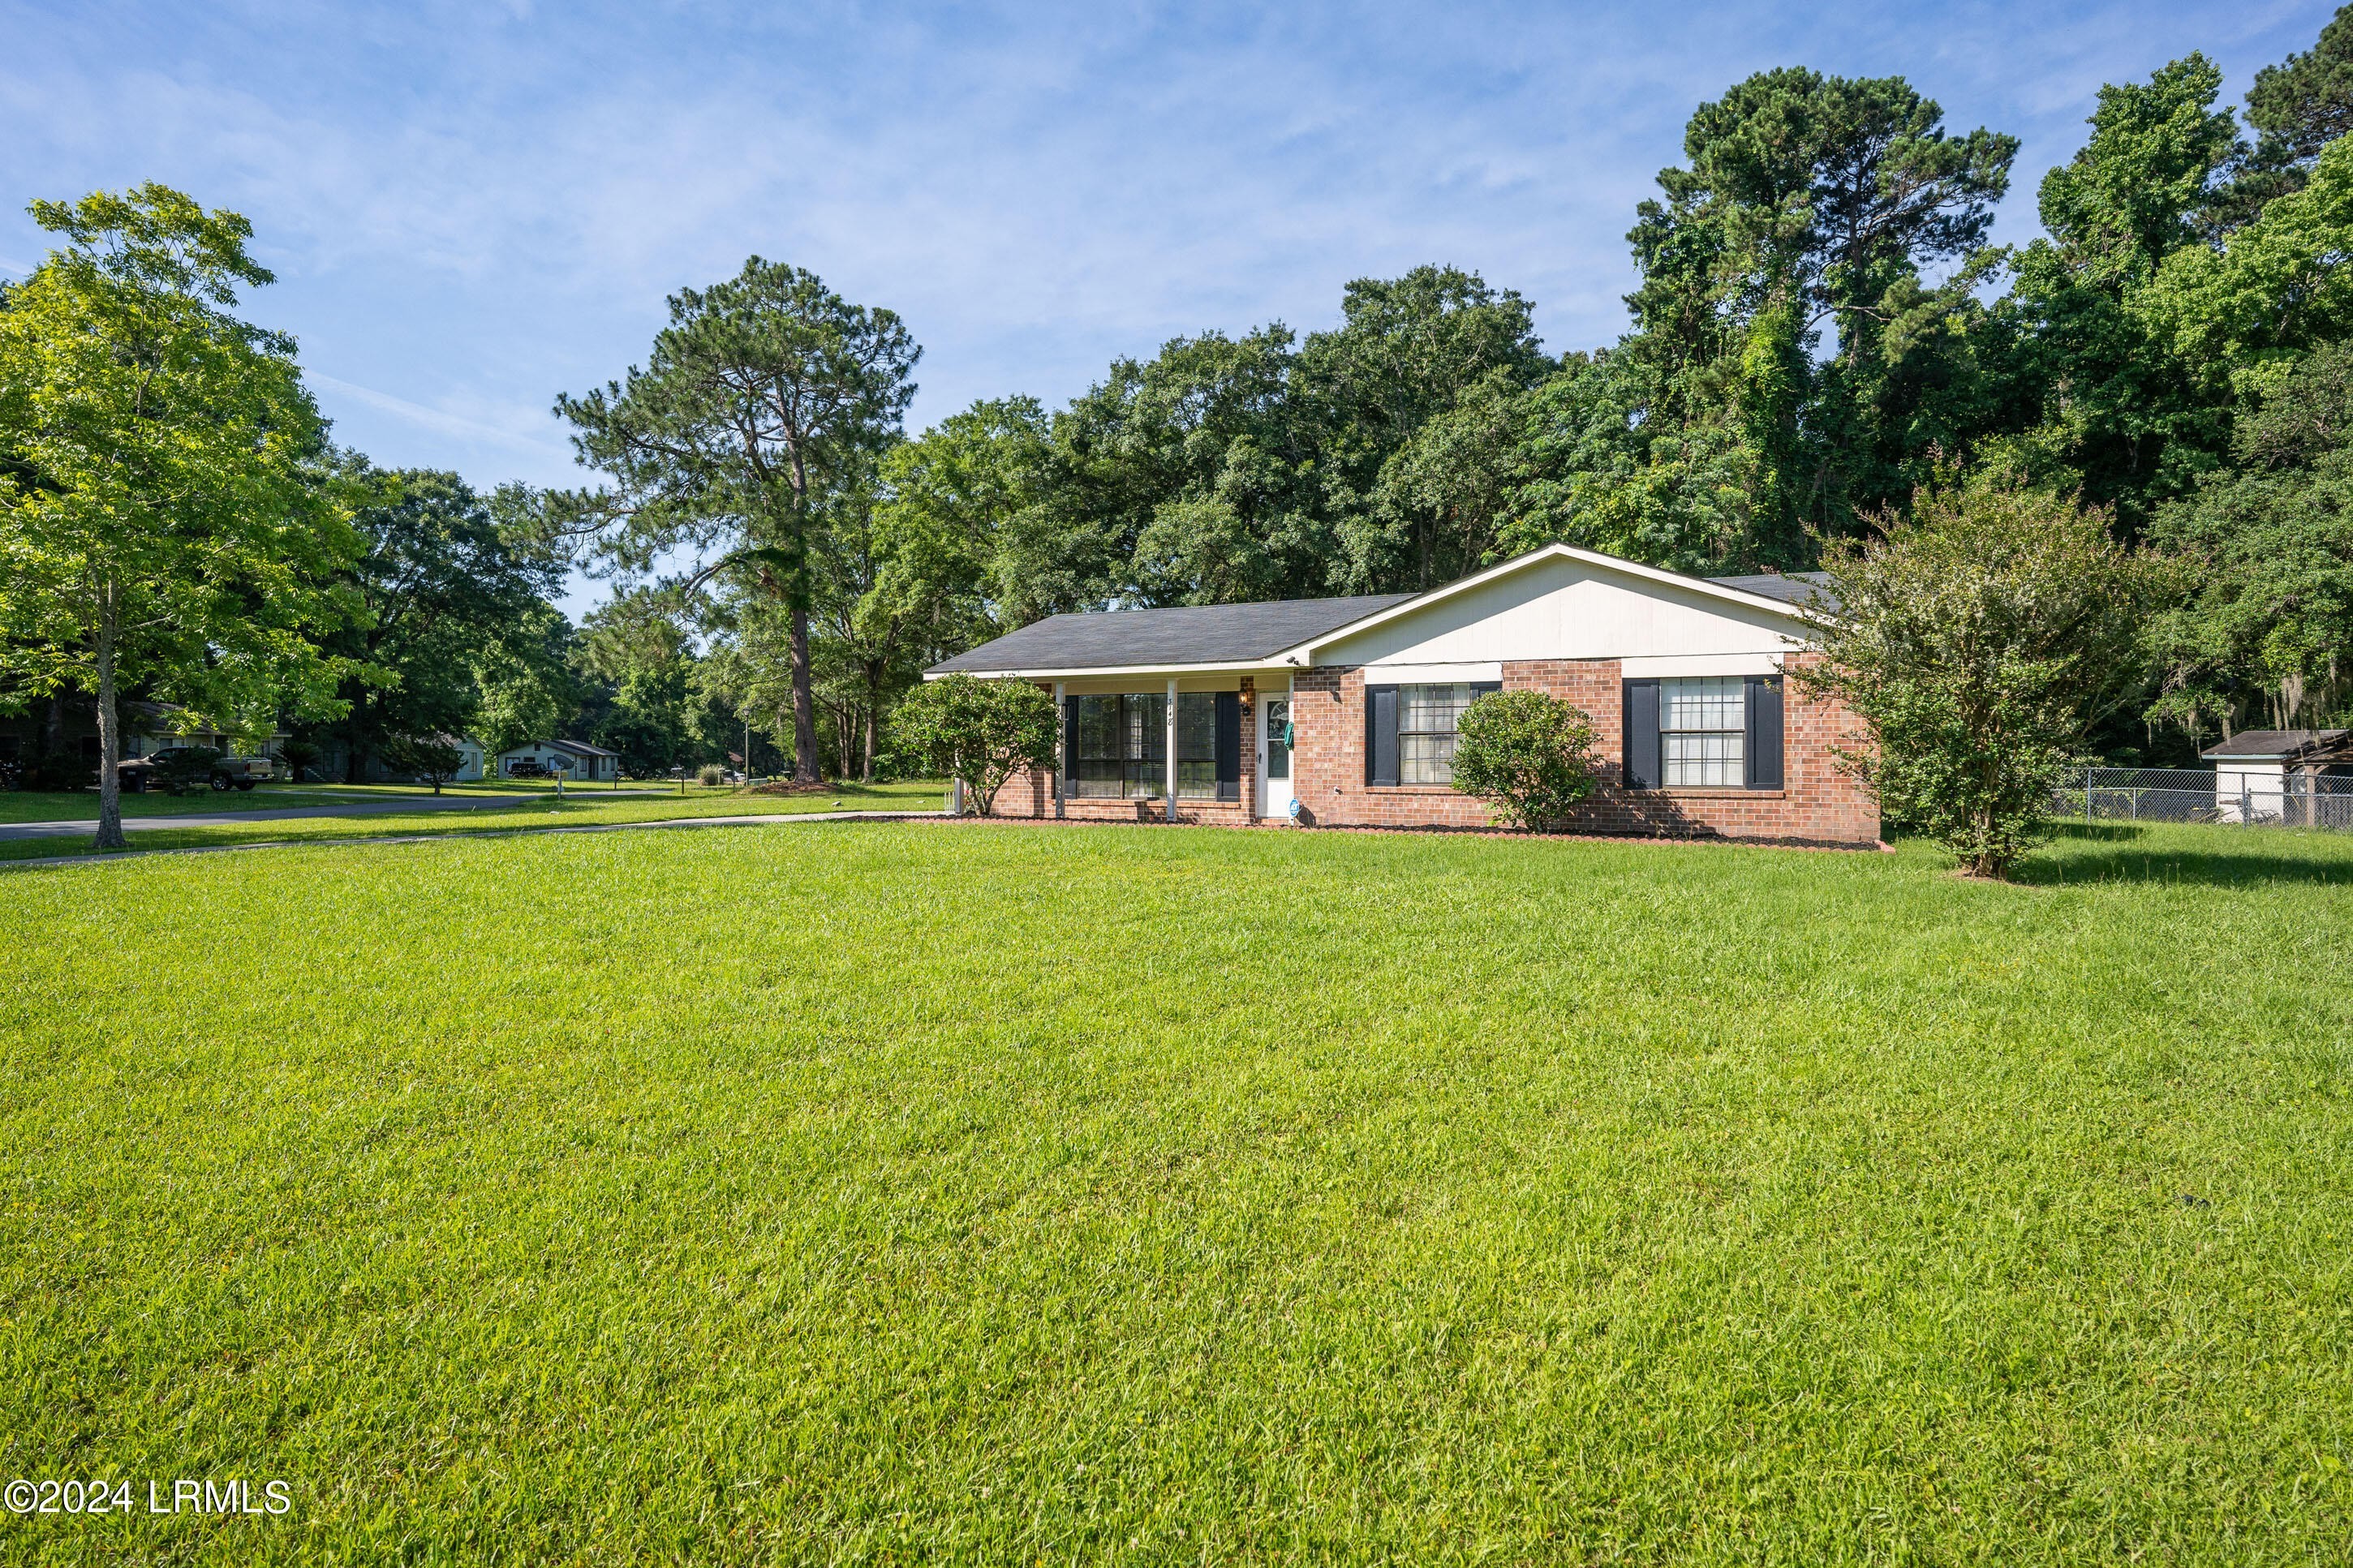 2. 3148 Clydesdale Circle